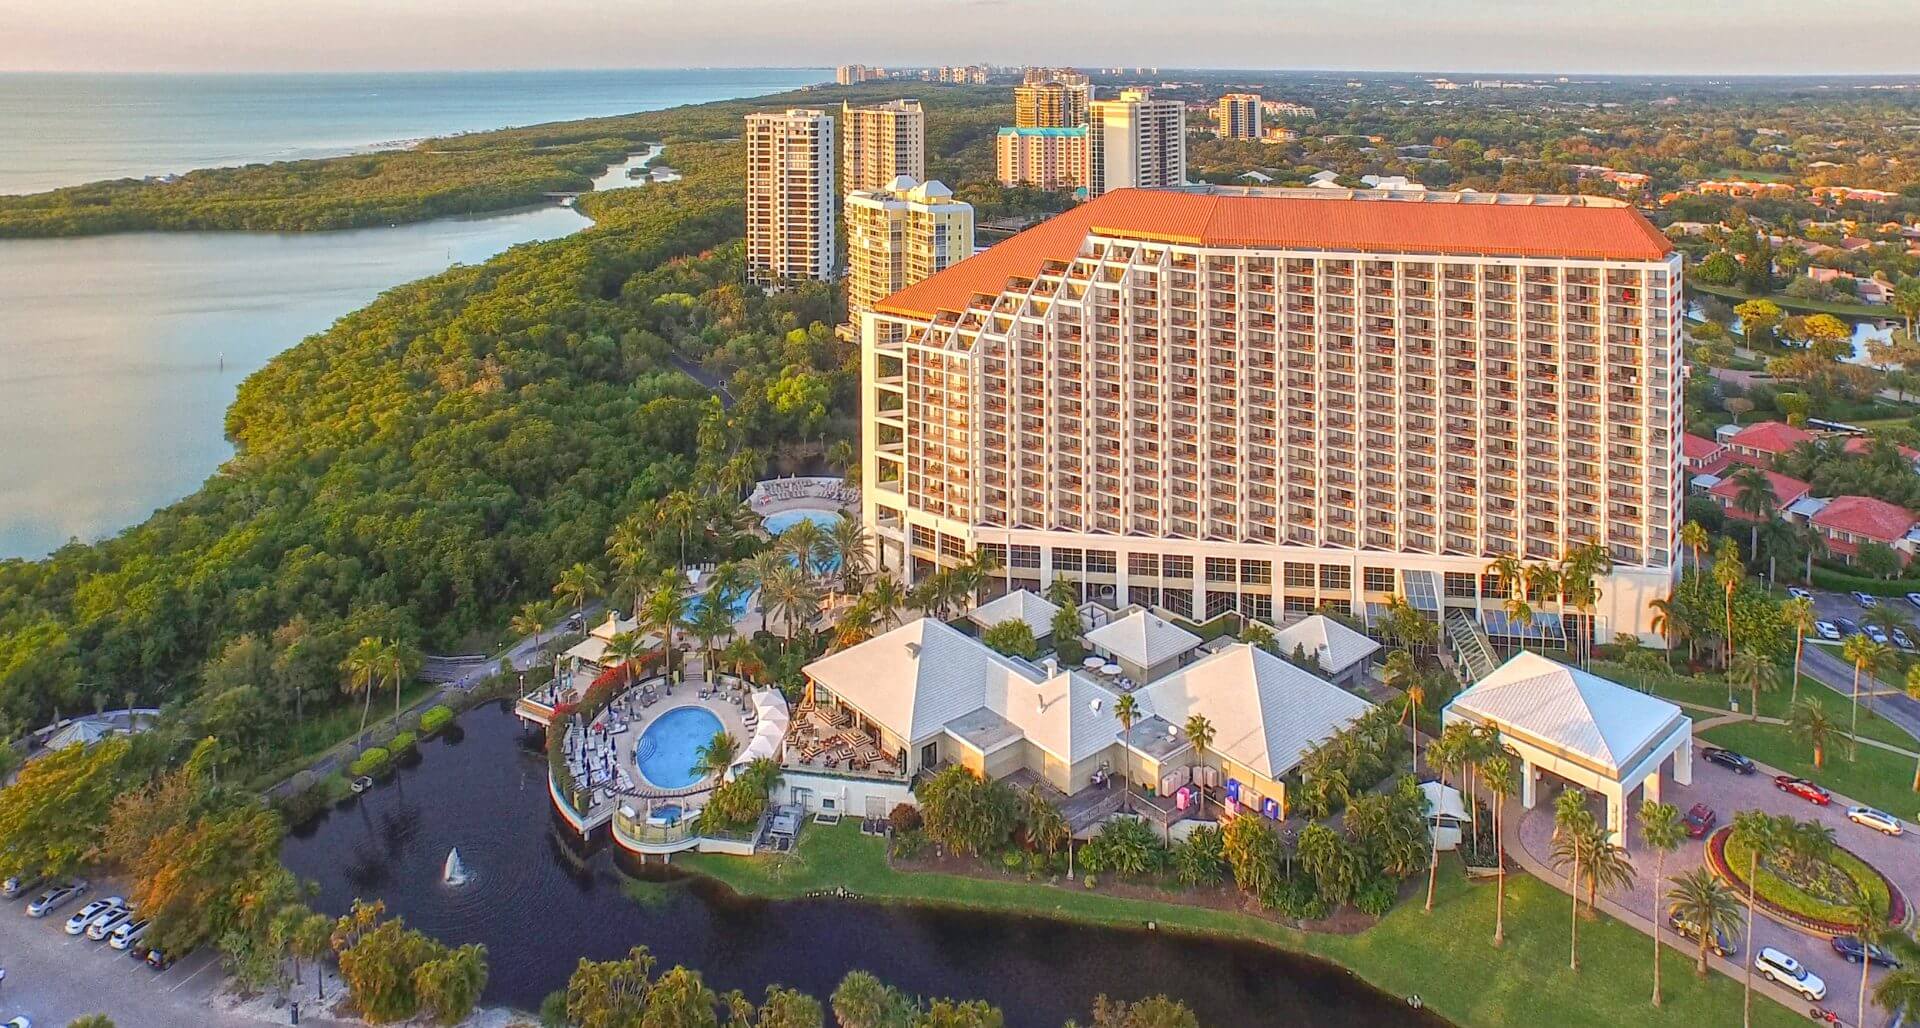 Naples Grande Beach Resort selects Cloud5 for hosted telephony